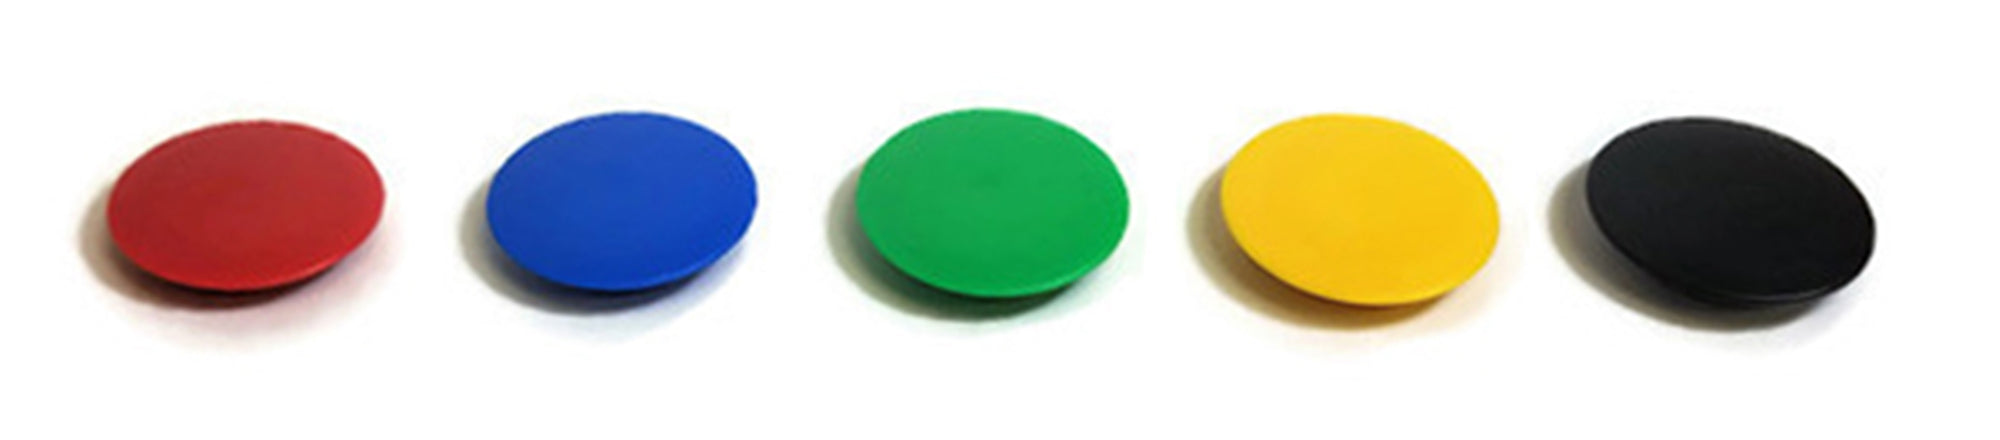 High Powered Magnets for Glass Dry-Erase Boards, Set of 5 Mixed Colors. 